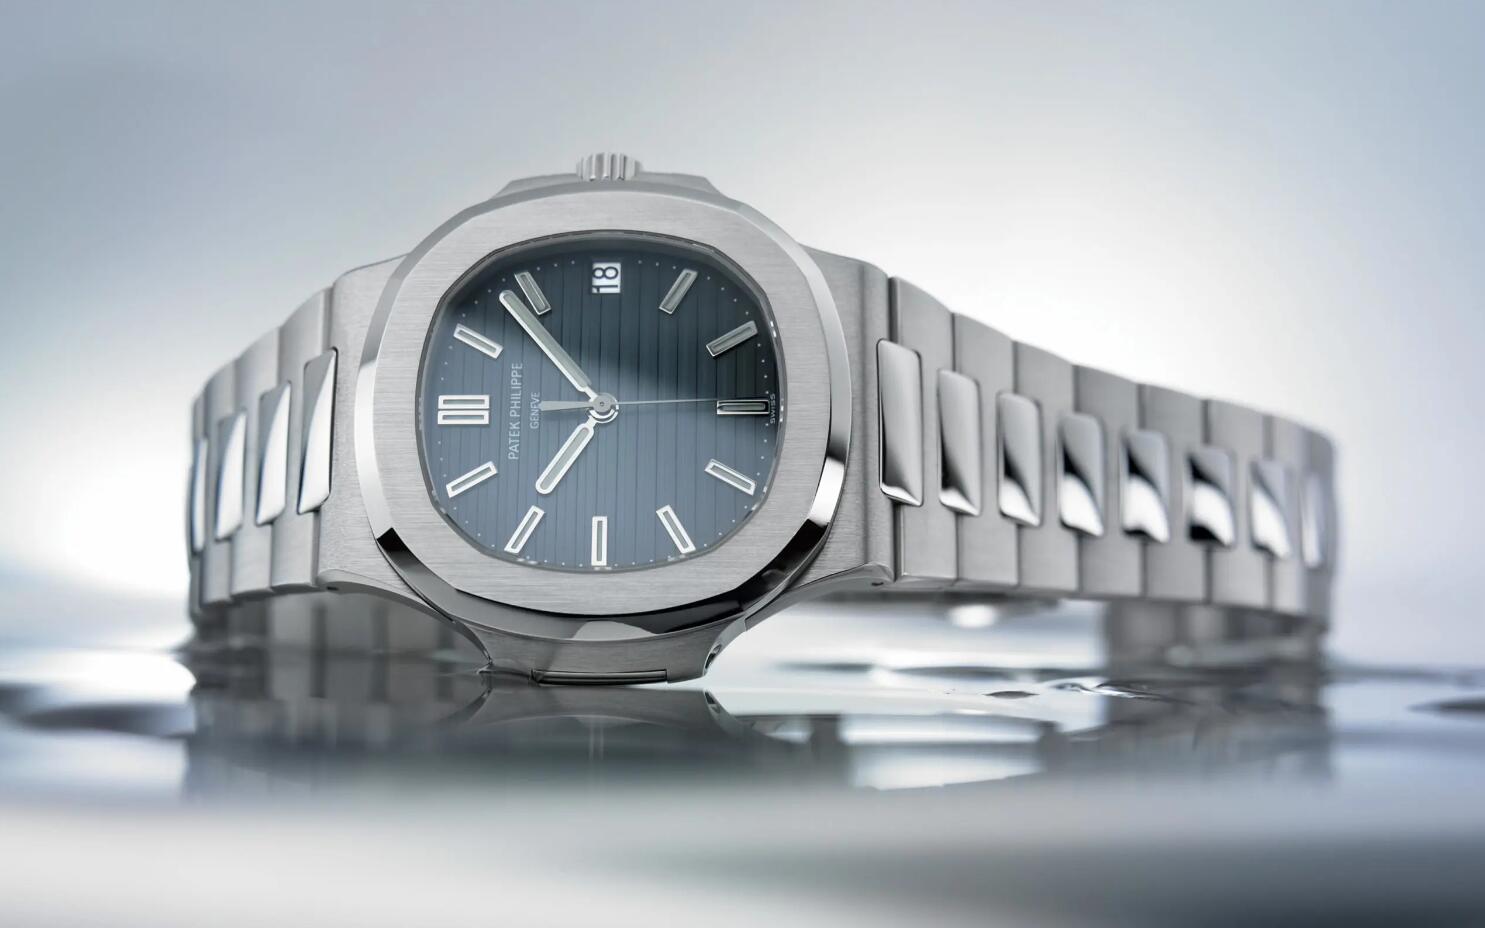 Replica Patek Philippe Nautilus 5711 made of ordinary steel is discontinued